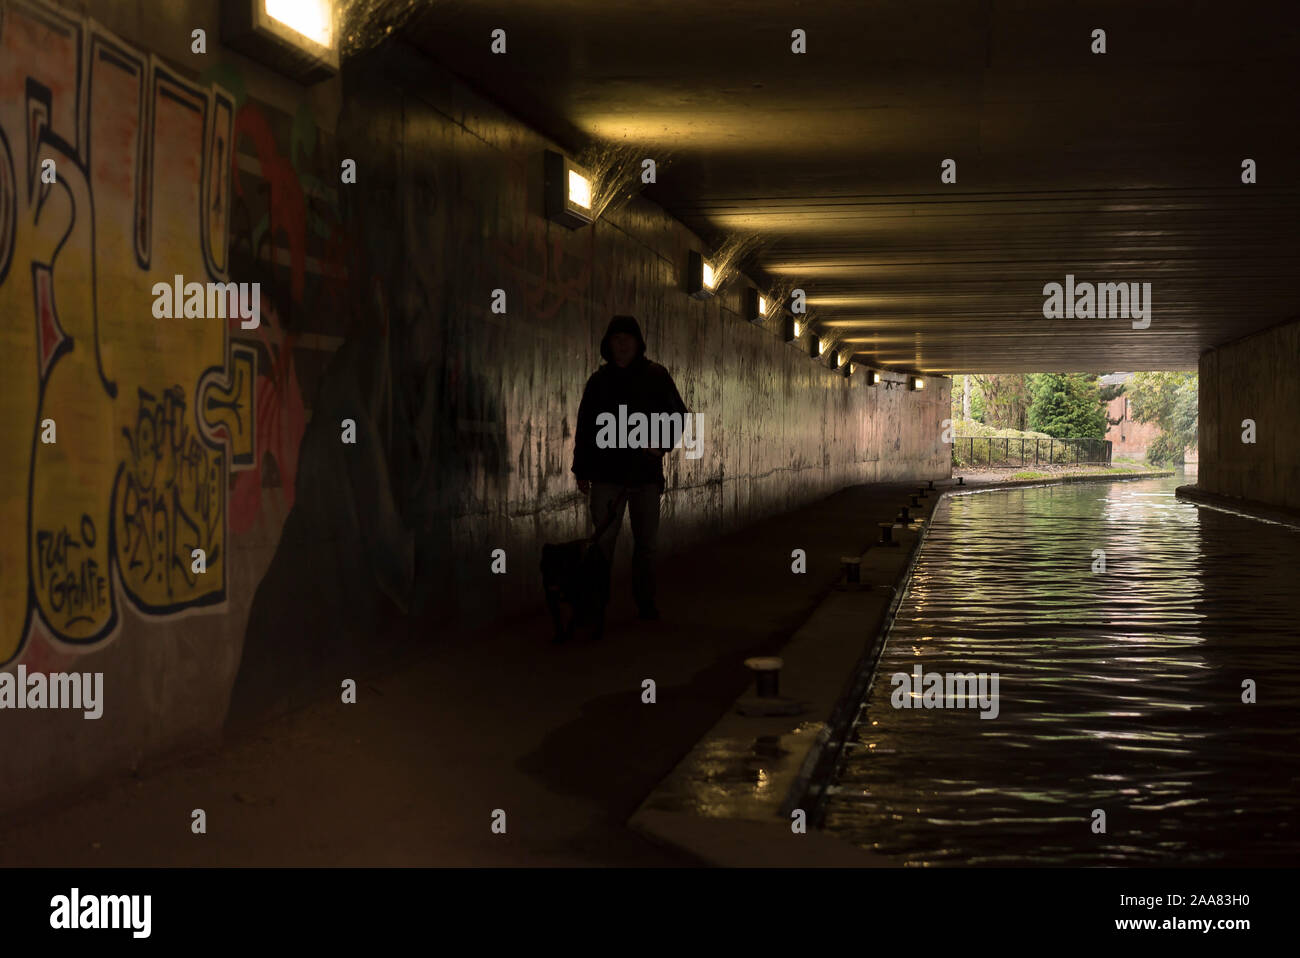 An isolated, hooded, solitary figure walking by an urban canal in dark, UK pedestrian underpass, passing urban graffiti artwork sprayed on walls Stock Photo